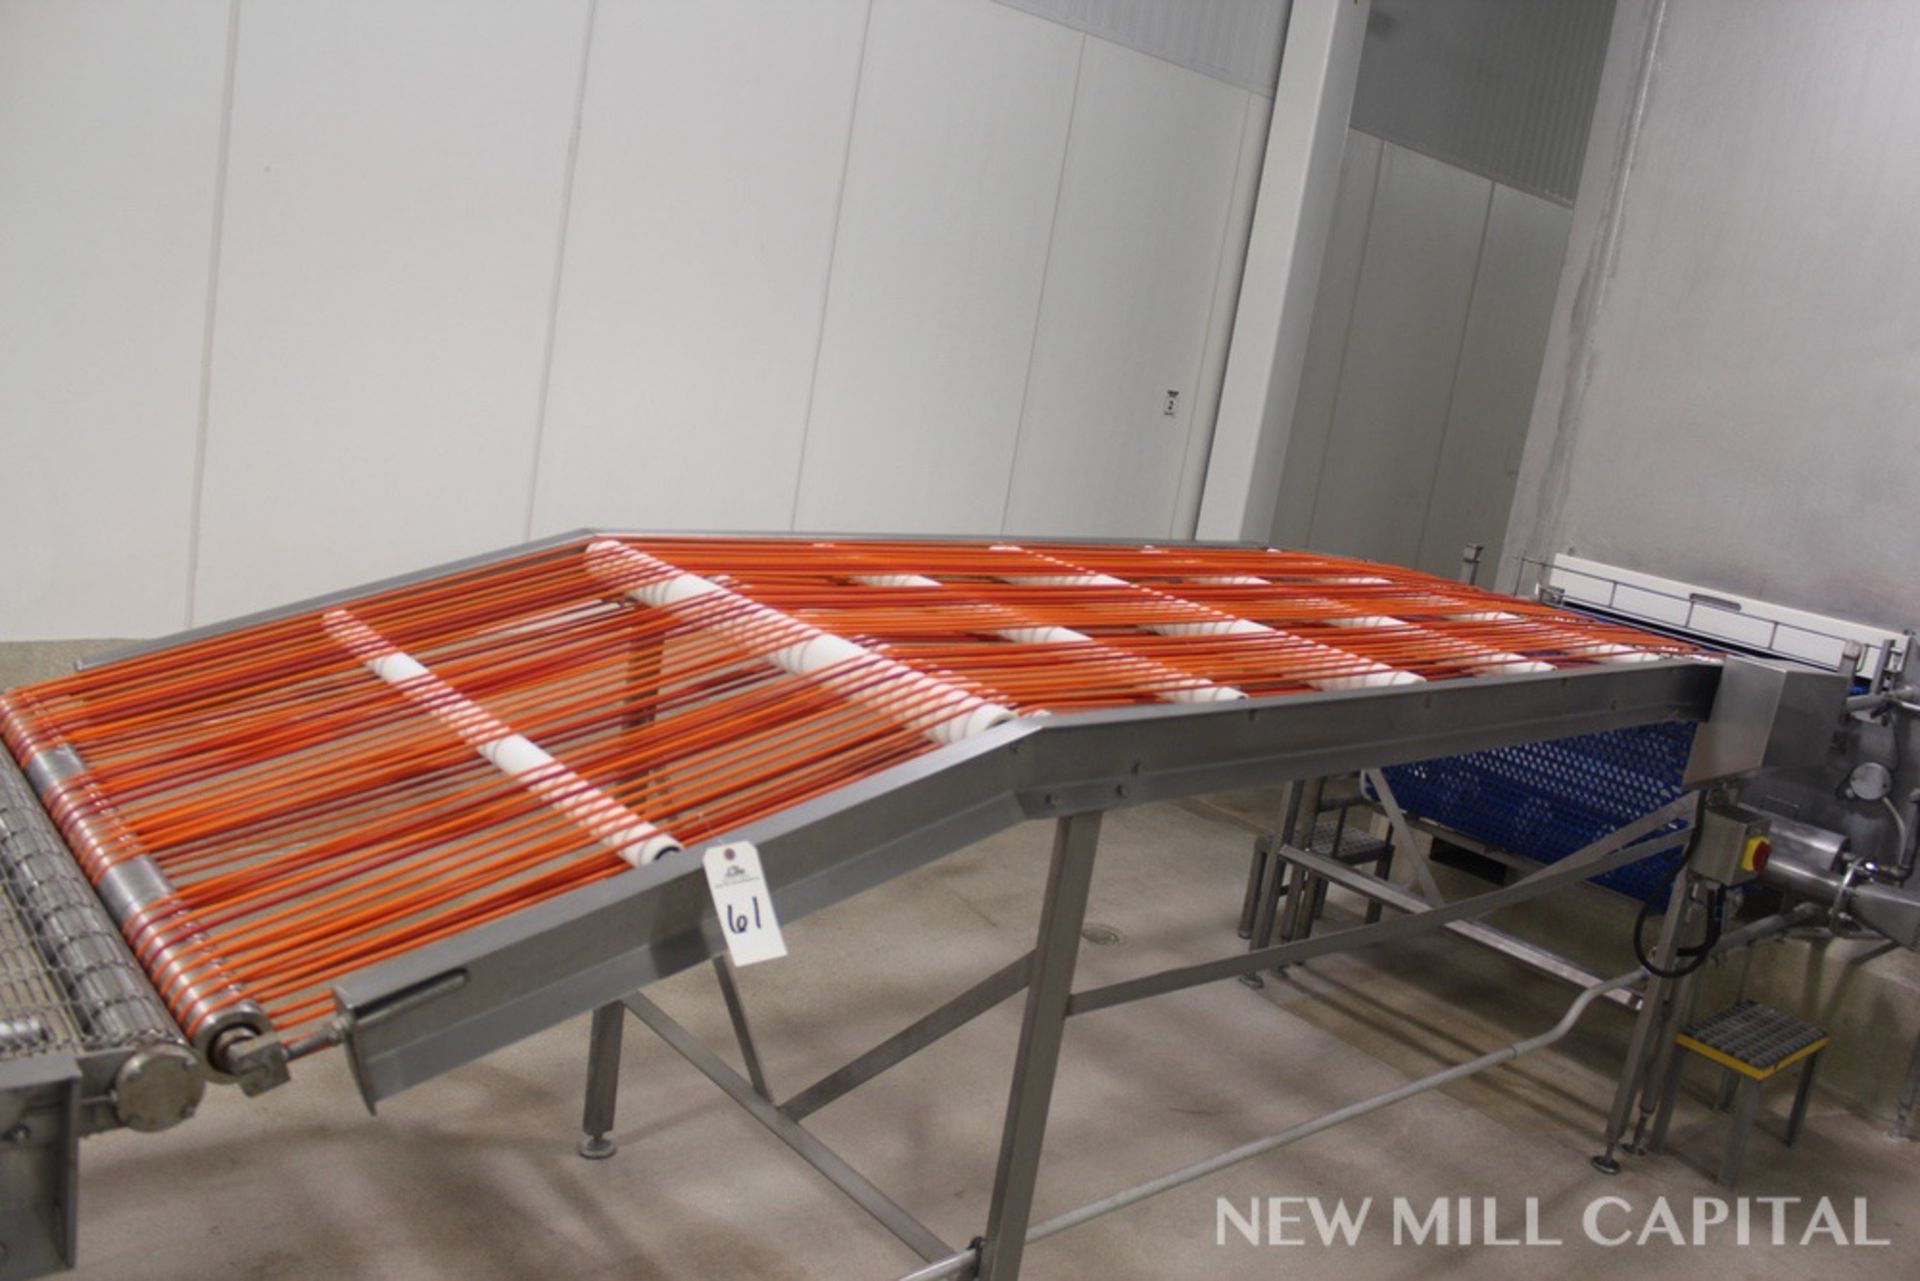 42" X 141" Rope Type Delivery Conveyor Section | Rigging Fee: $125